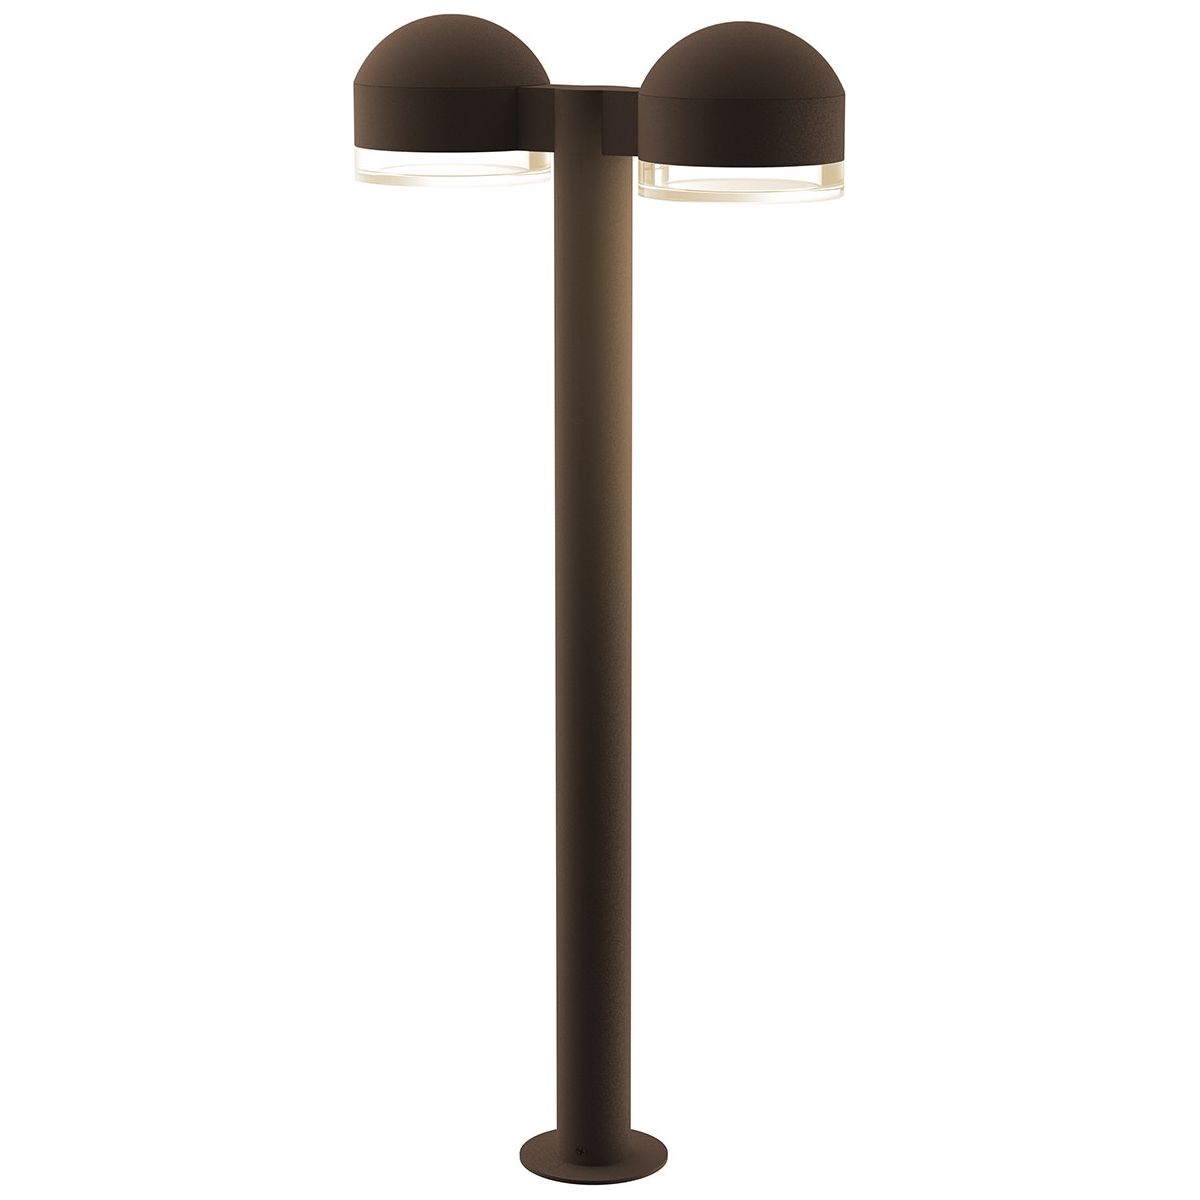 REALS 28" LED Double Bollard with Dome Cap and Cylinder Lens